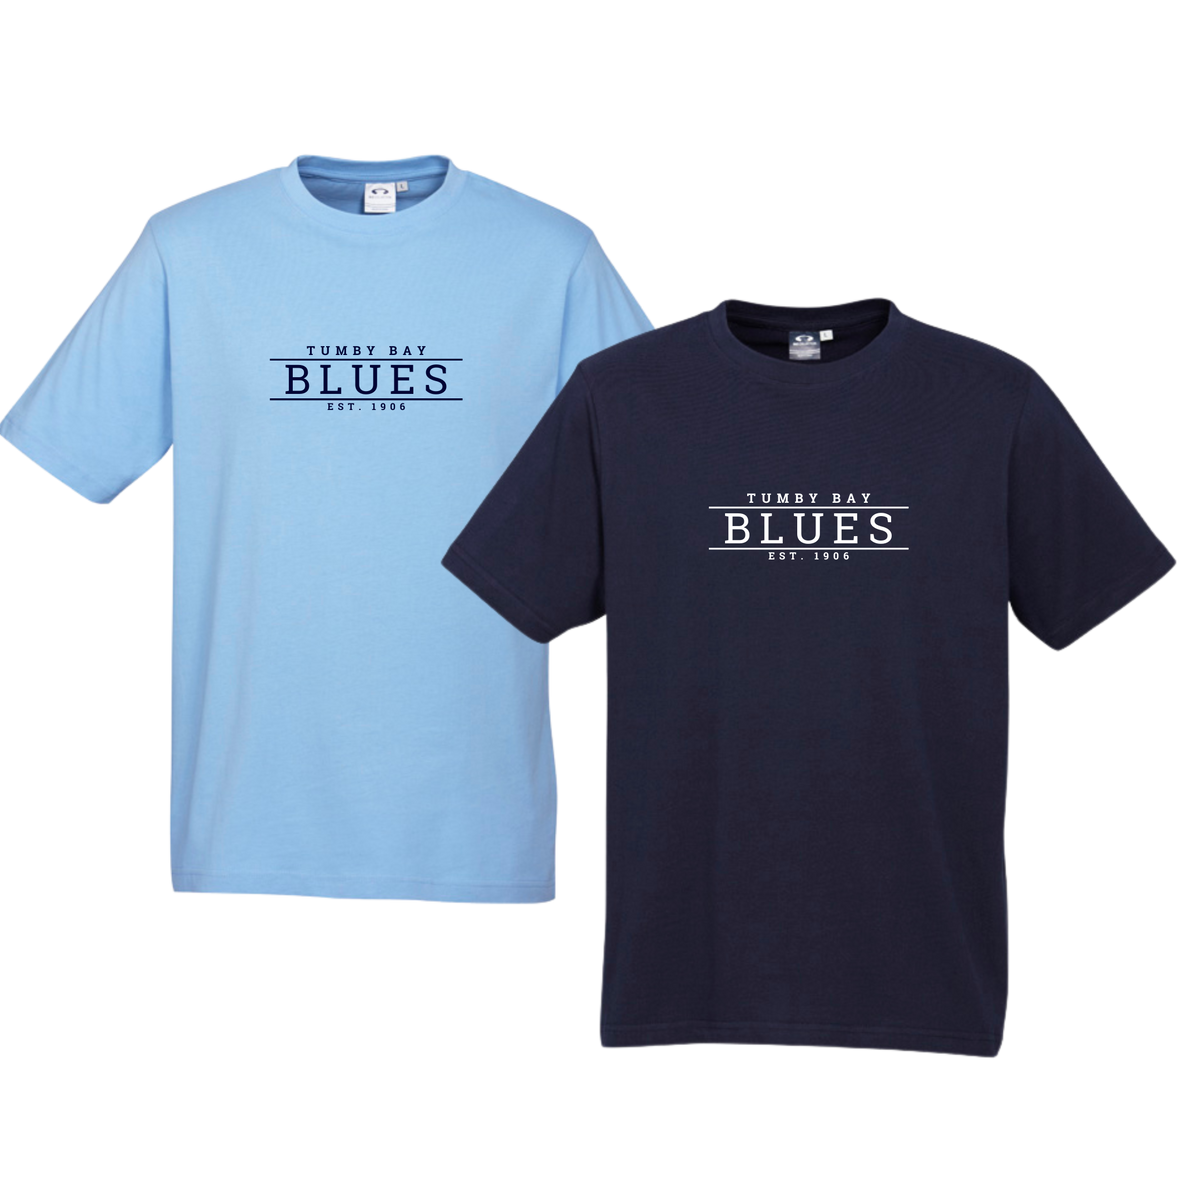 Tumby Bay Blues Kids Ice Short Sleeve Tee T10032-Collins Clothing Co